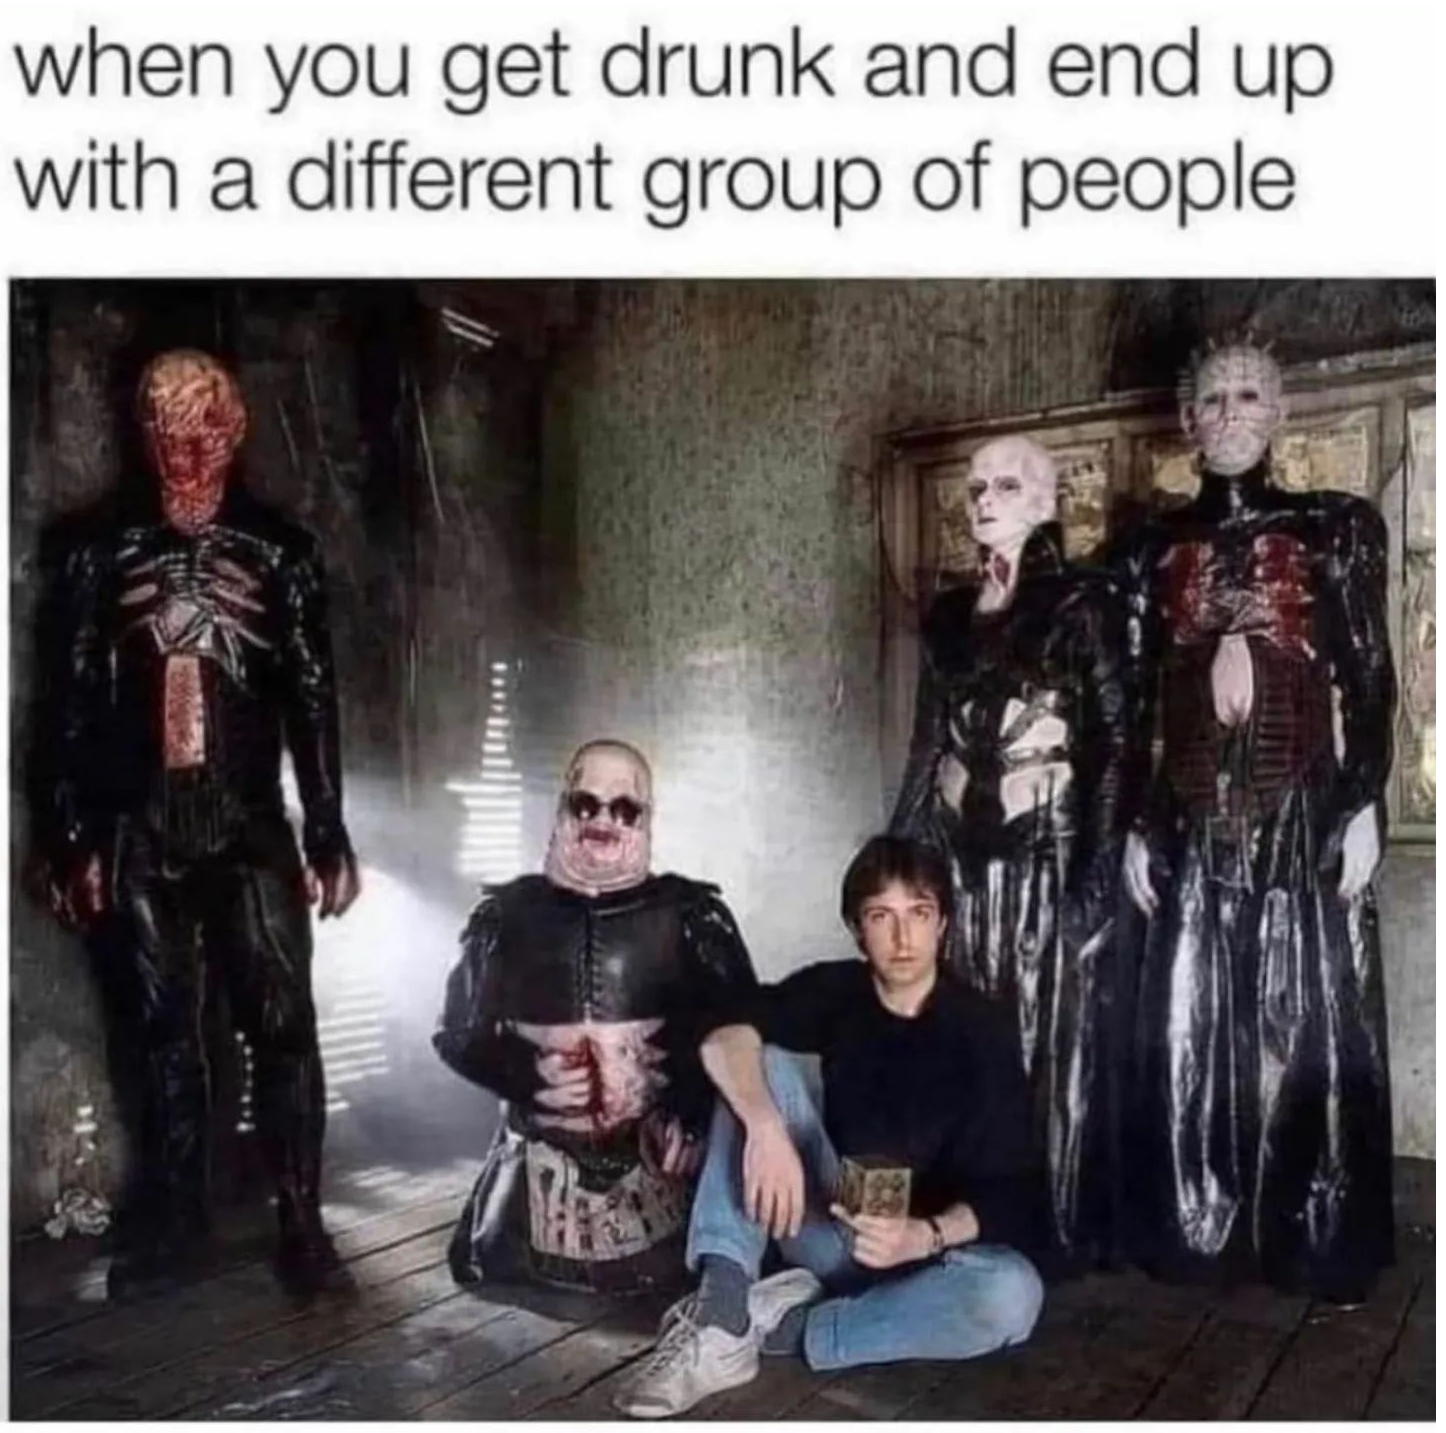 funny memes and cool pics - different group meme - when you get drunk and end up with a different group of people